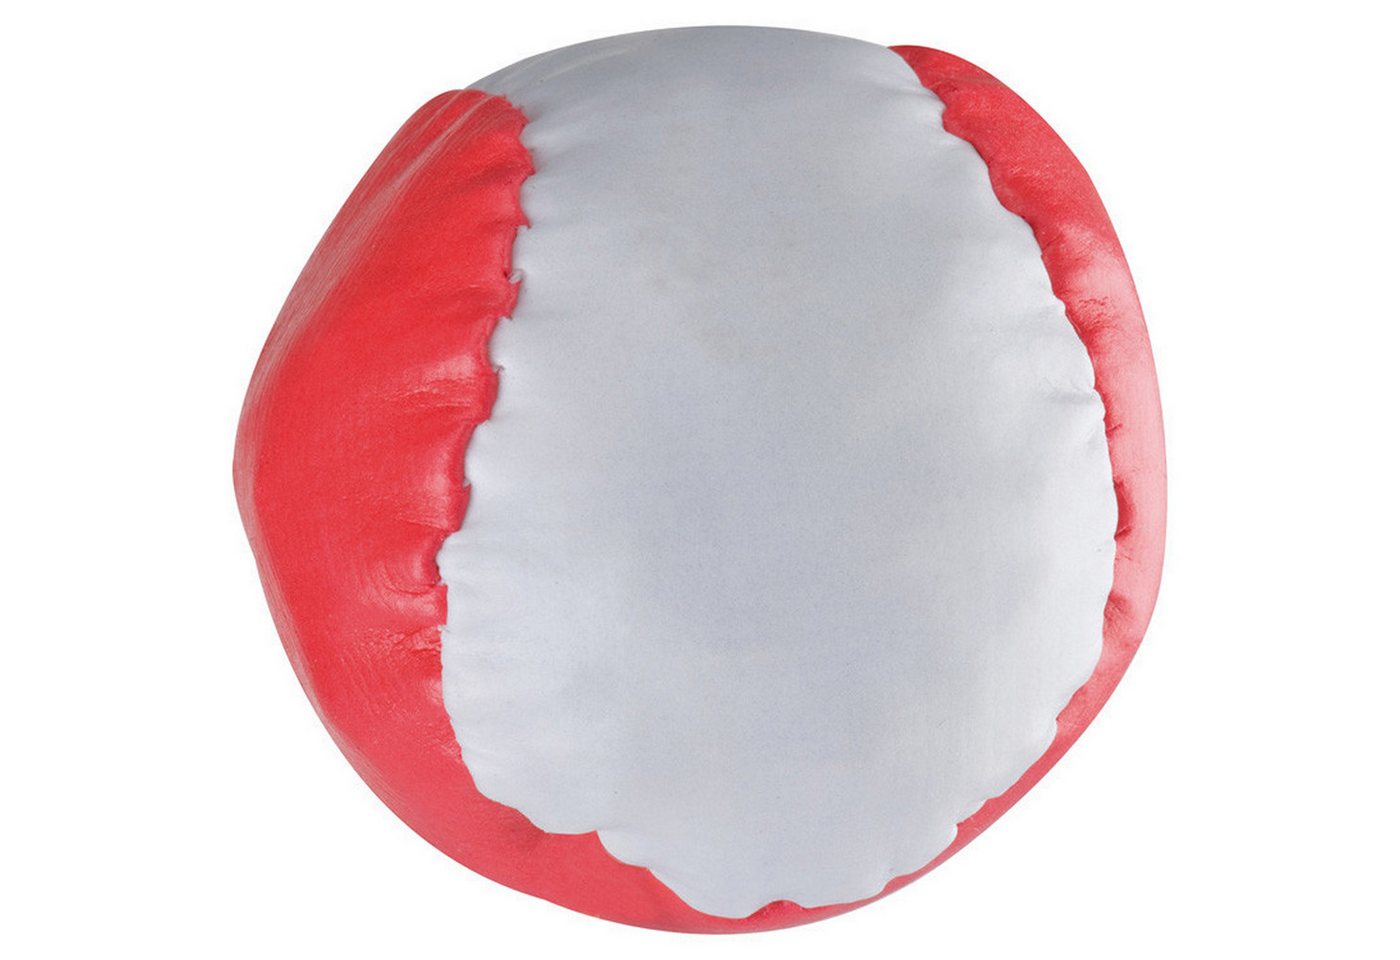 Livepac Office Physioball 5x Anti-Stressball / Wutball / Farbe: rot-weiß von Livepac Office